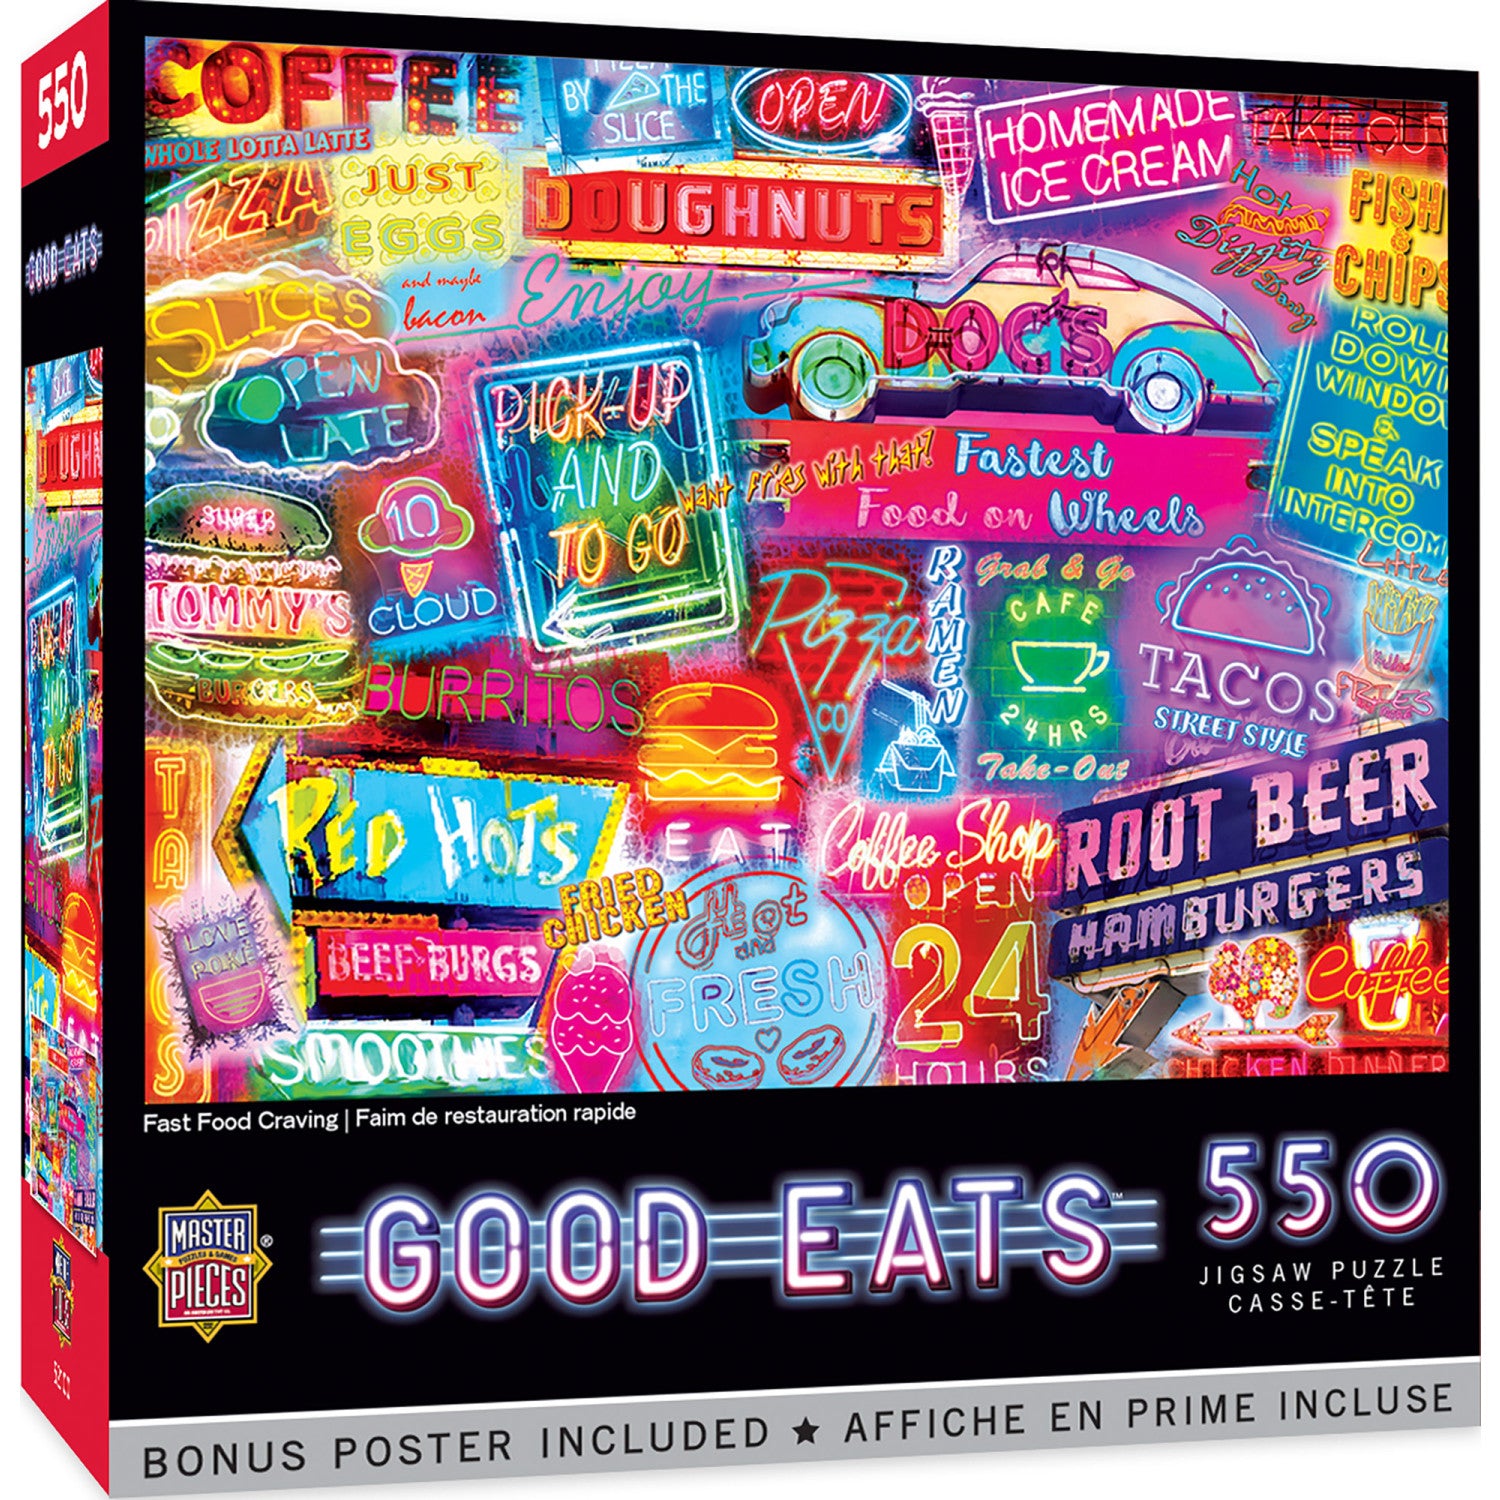 Good Eats - Fast Food Craving 550 Piece Jigsaw Puzzle